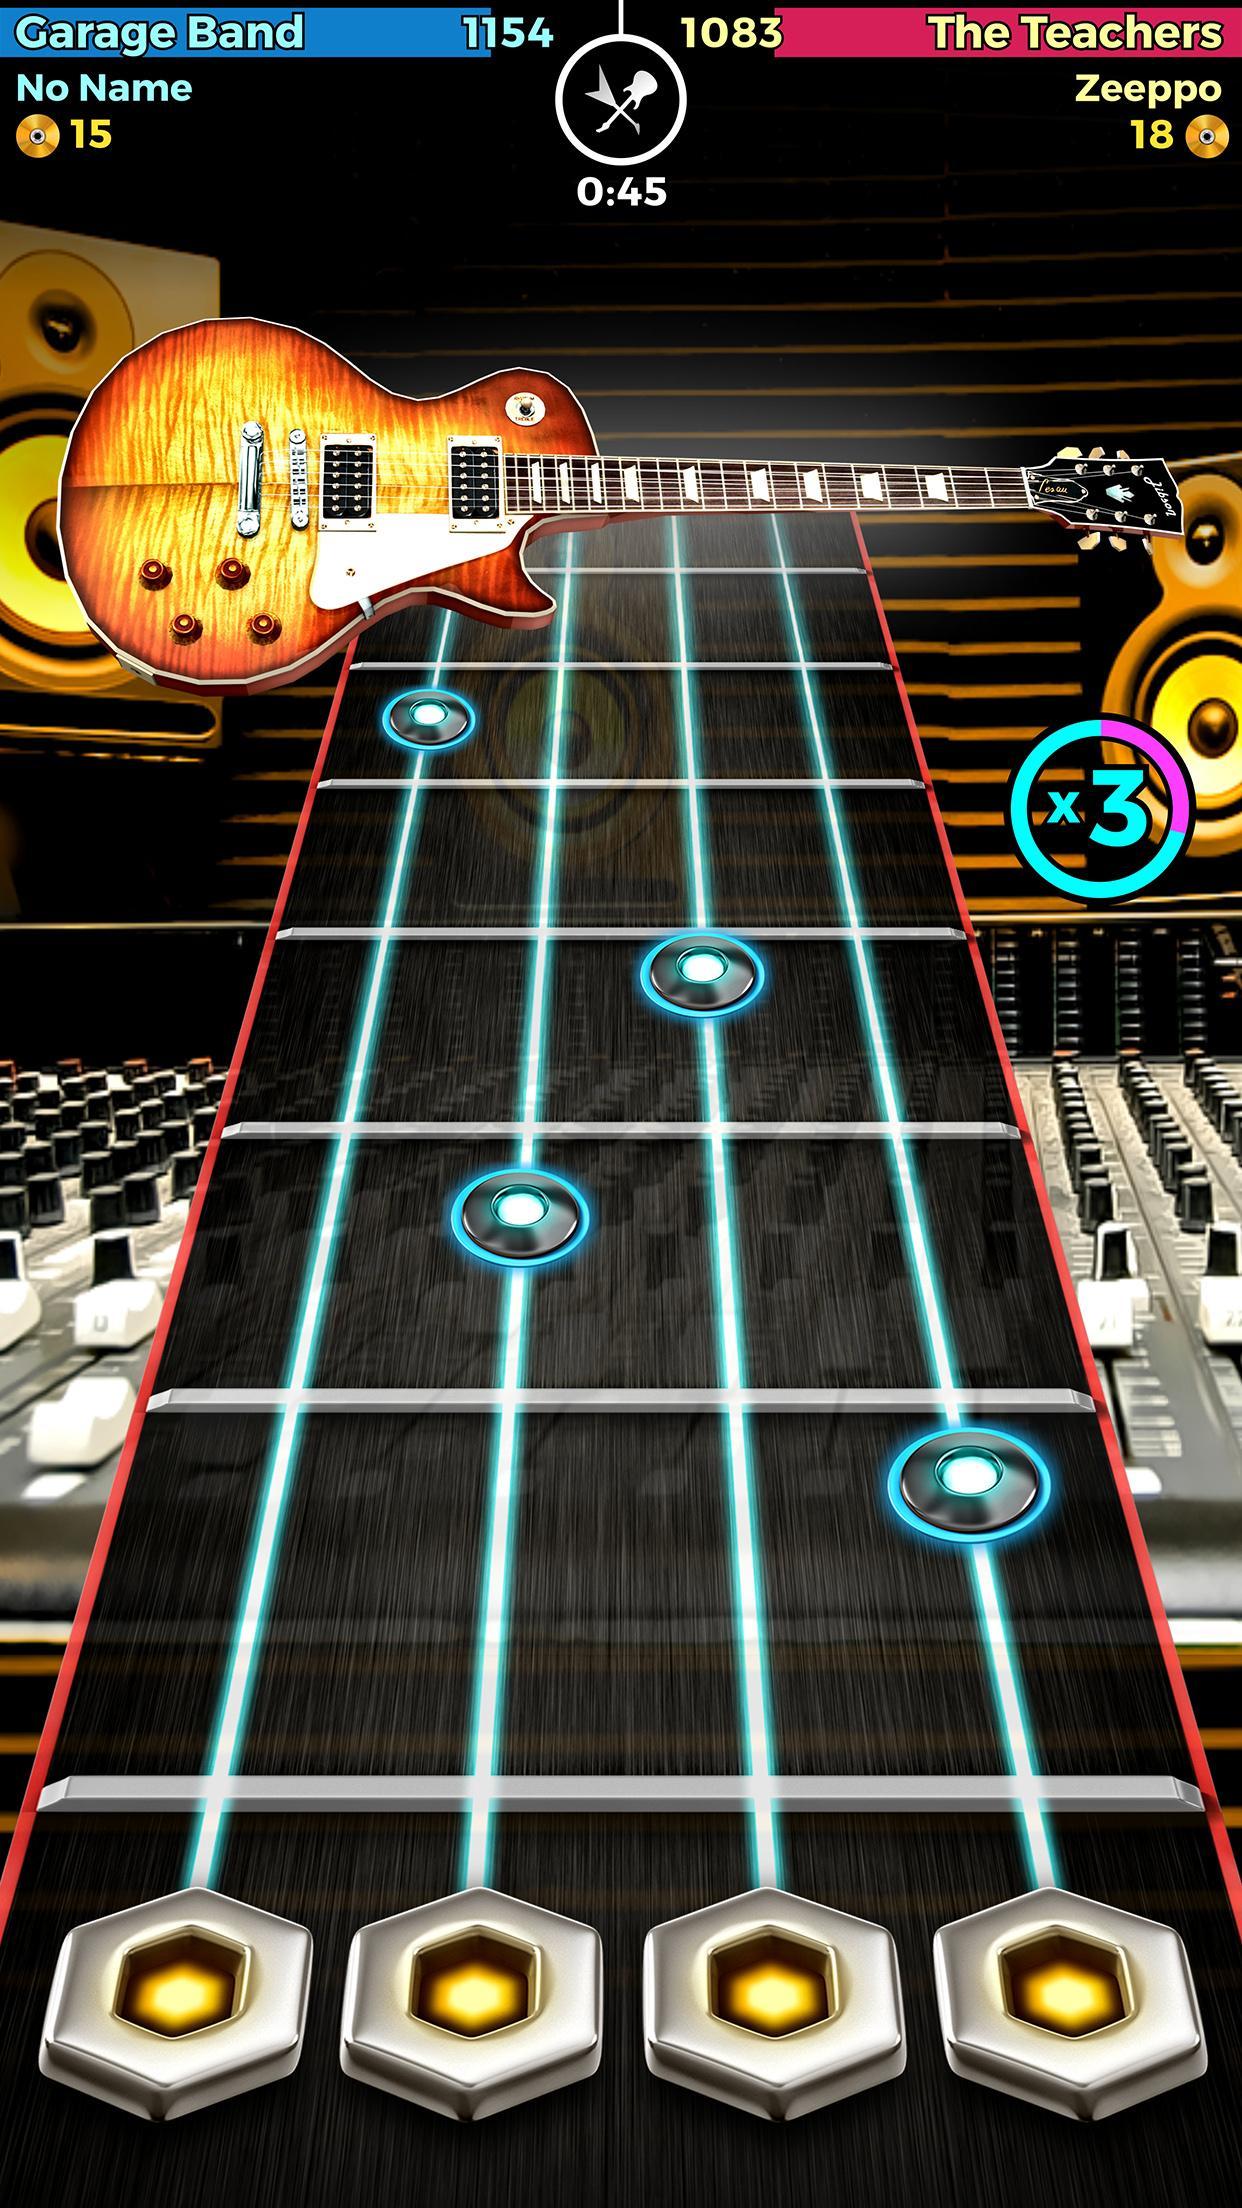 Guitar Band for Android - APK Download